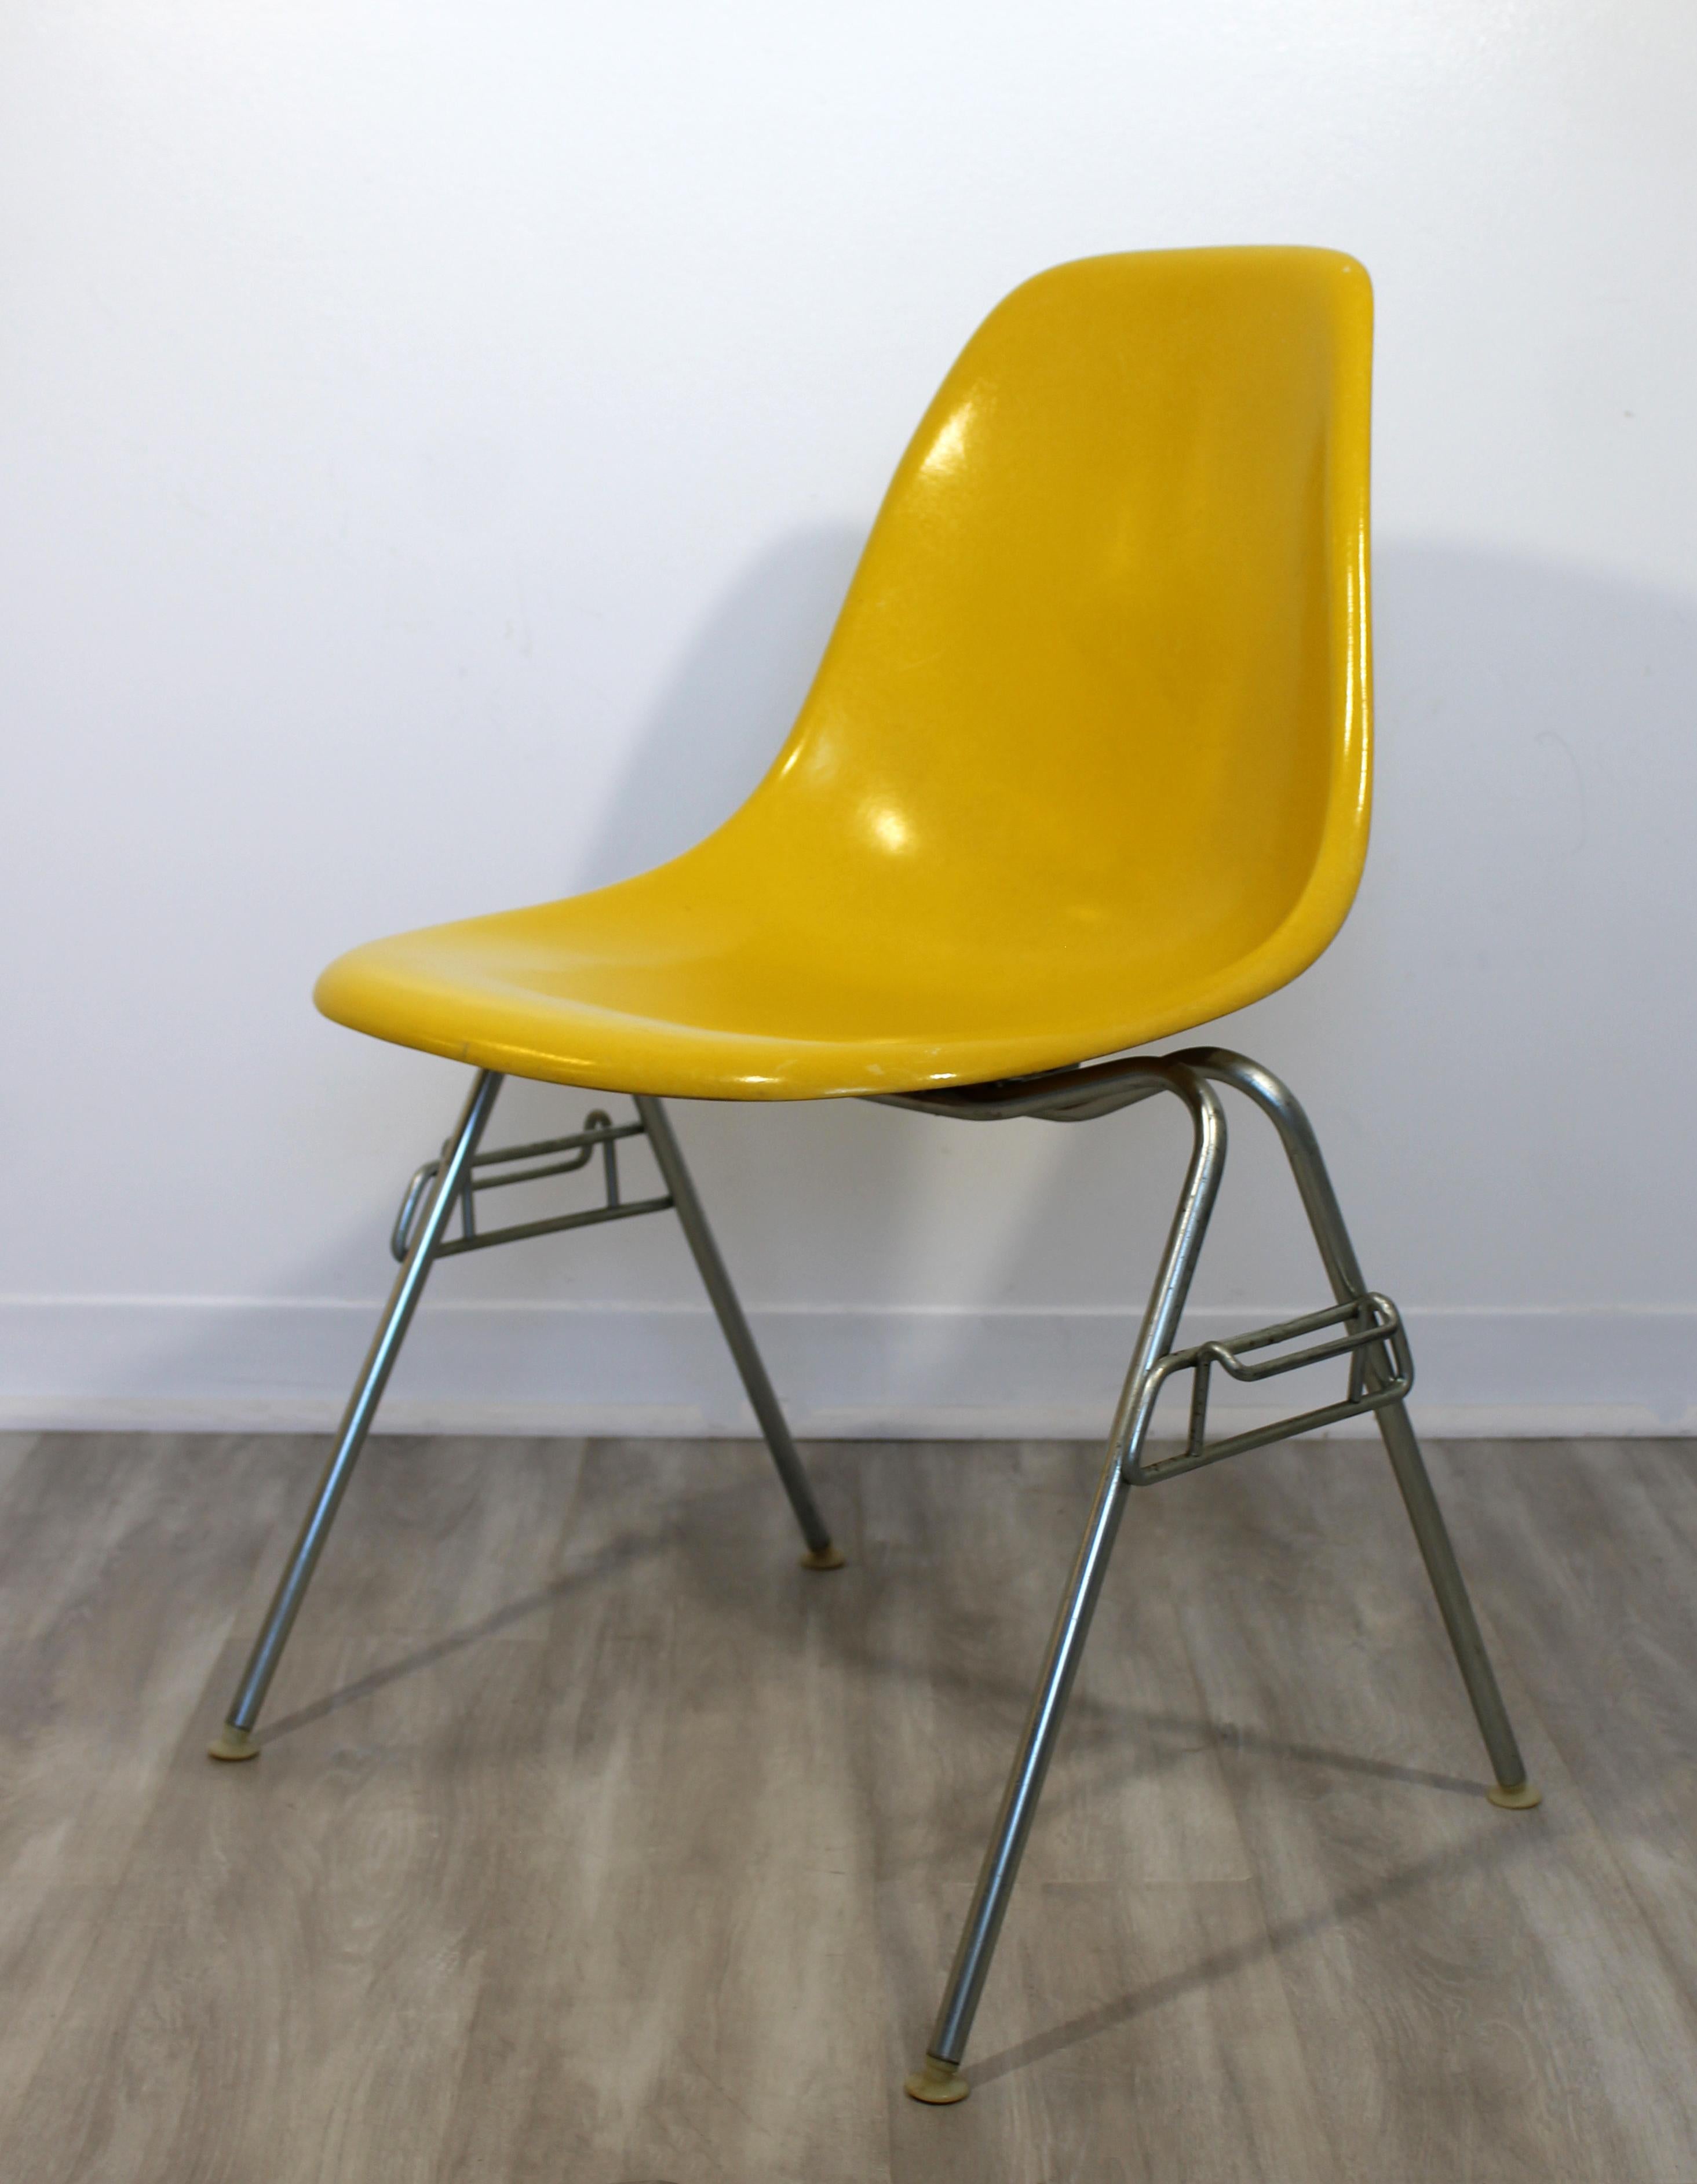 For your consideration is a fantastic set of four, yellow fiberglass shell, stacking side chairs, by Herman Miller, circa 1977. In excellent vintage condition. The dimensions of each chair are 22